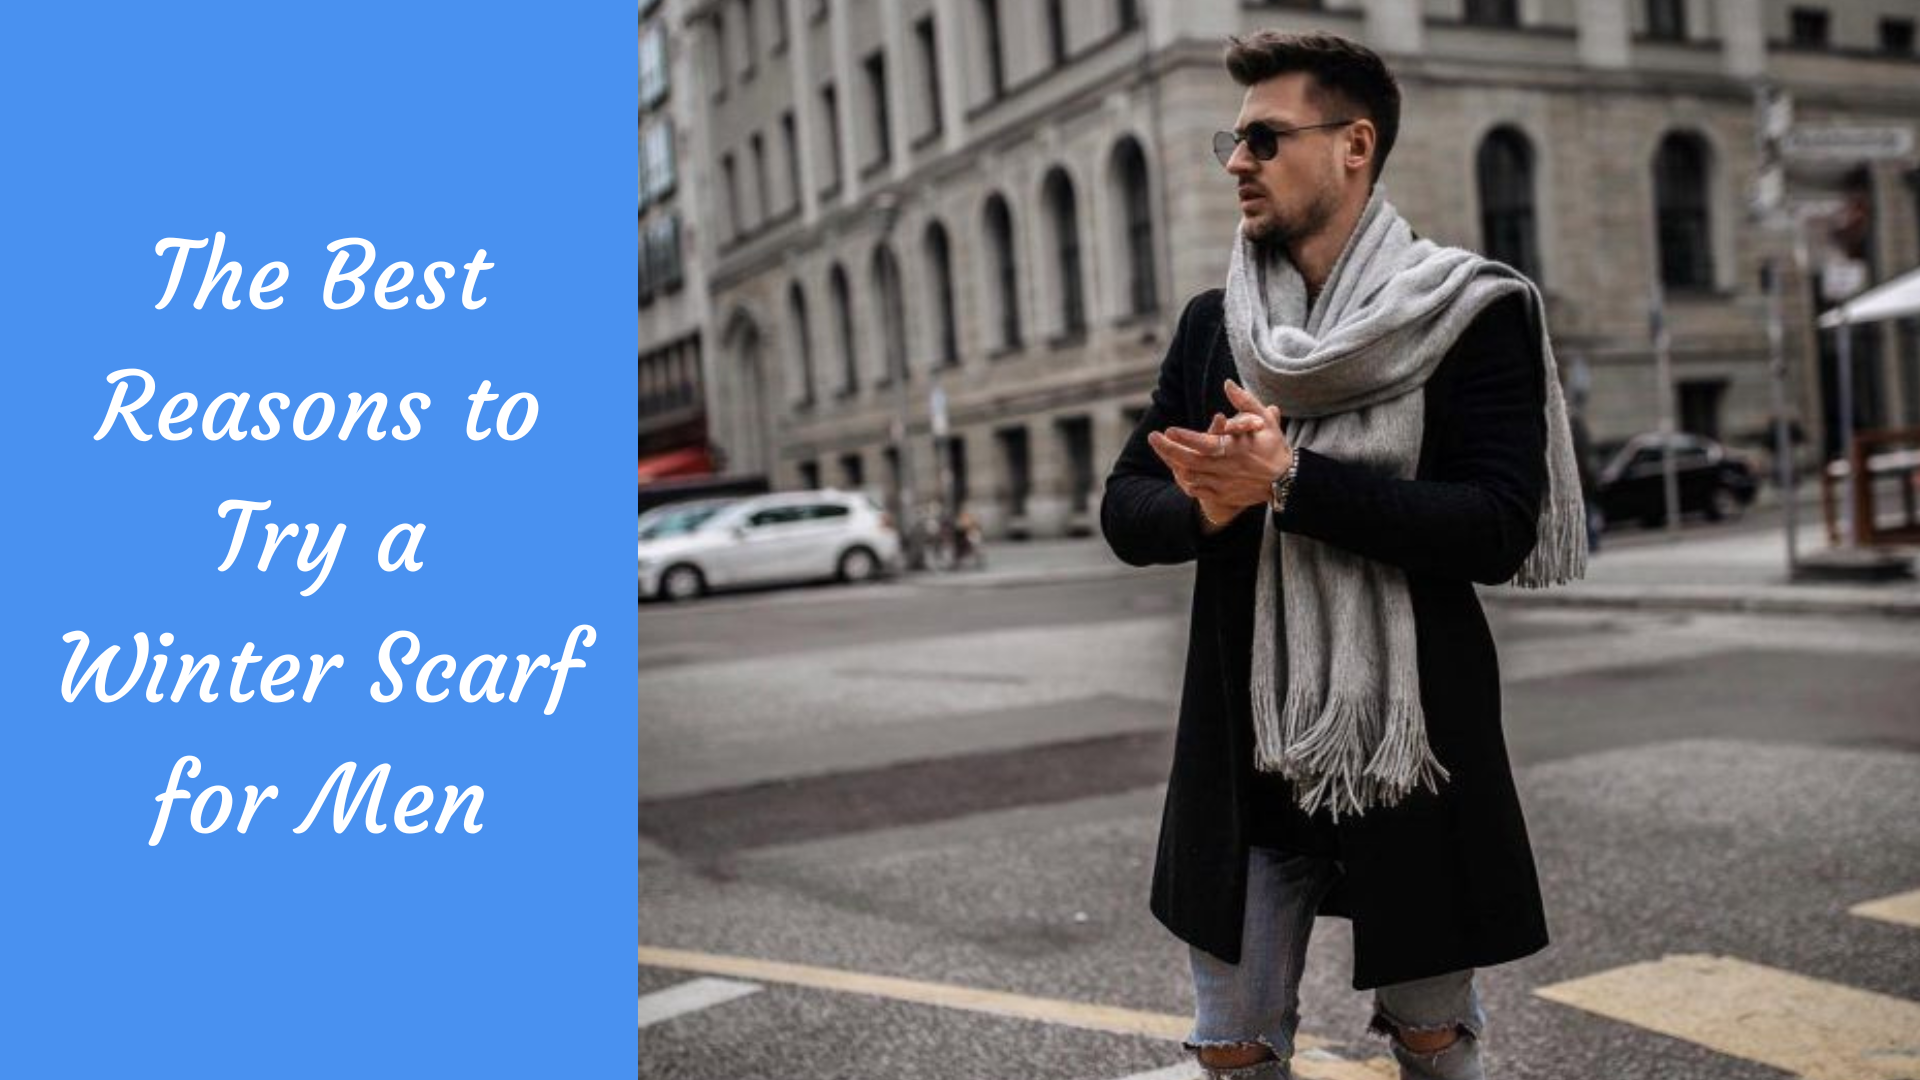 The Best Reasons to Try a Winter Scarf for MenThe Best Reasons to